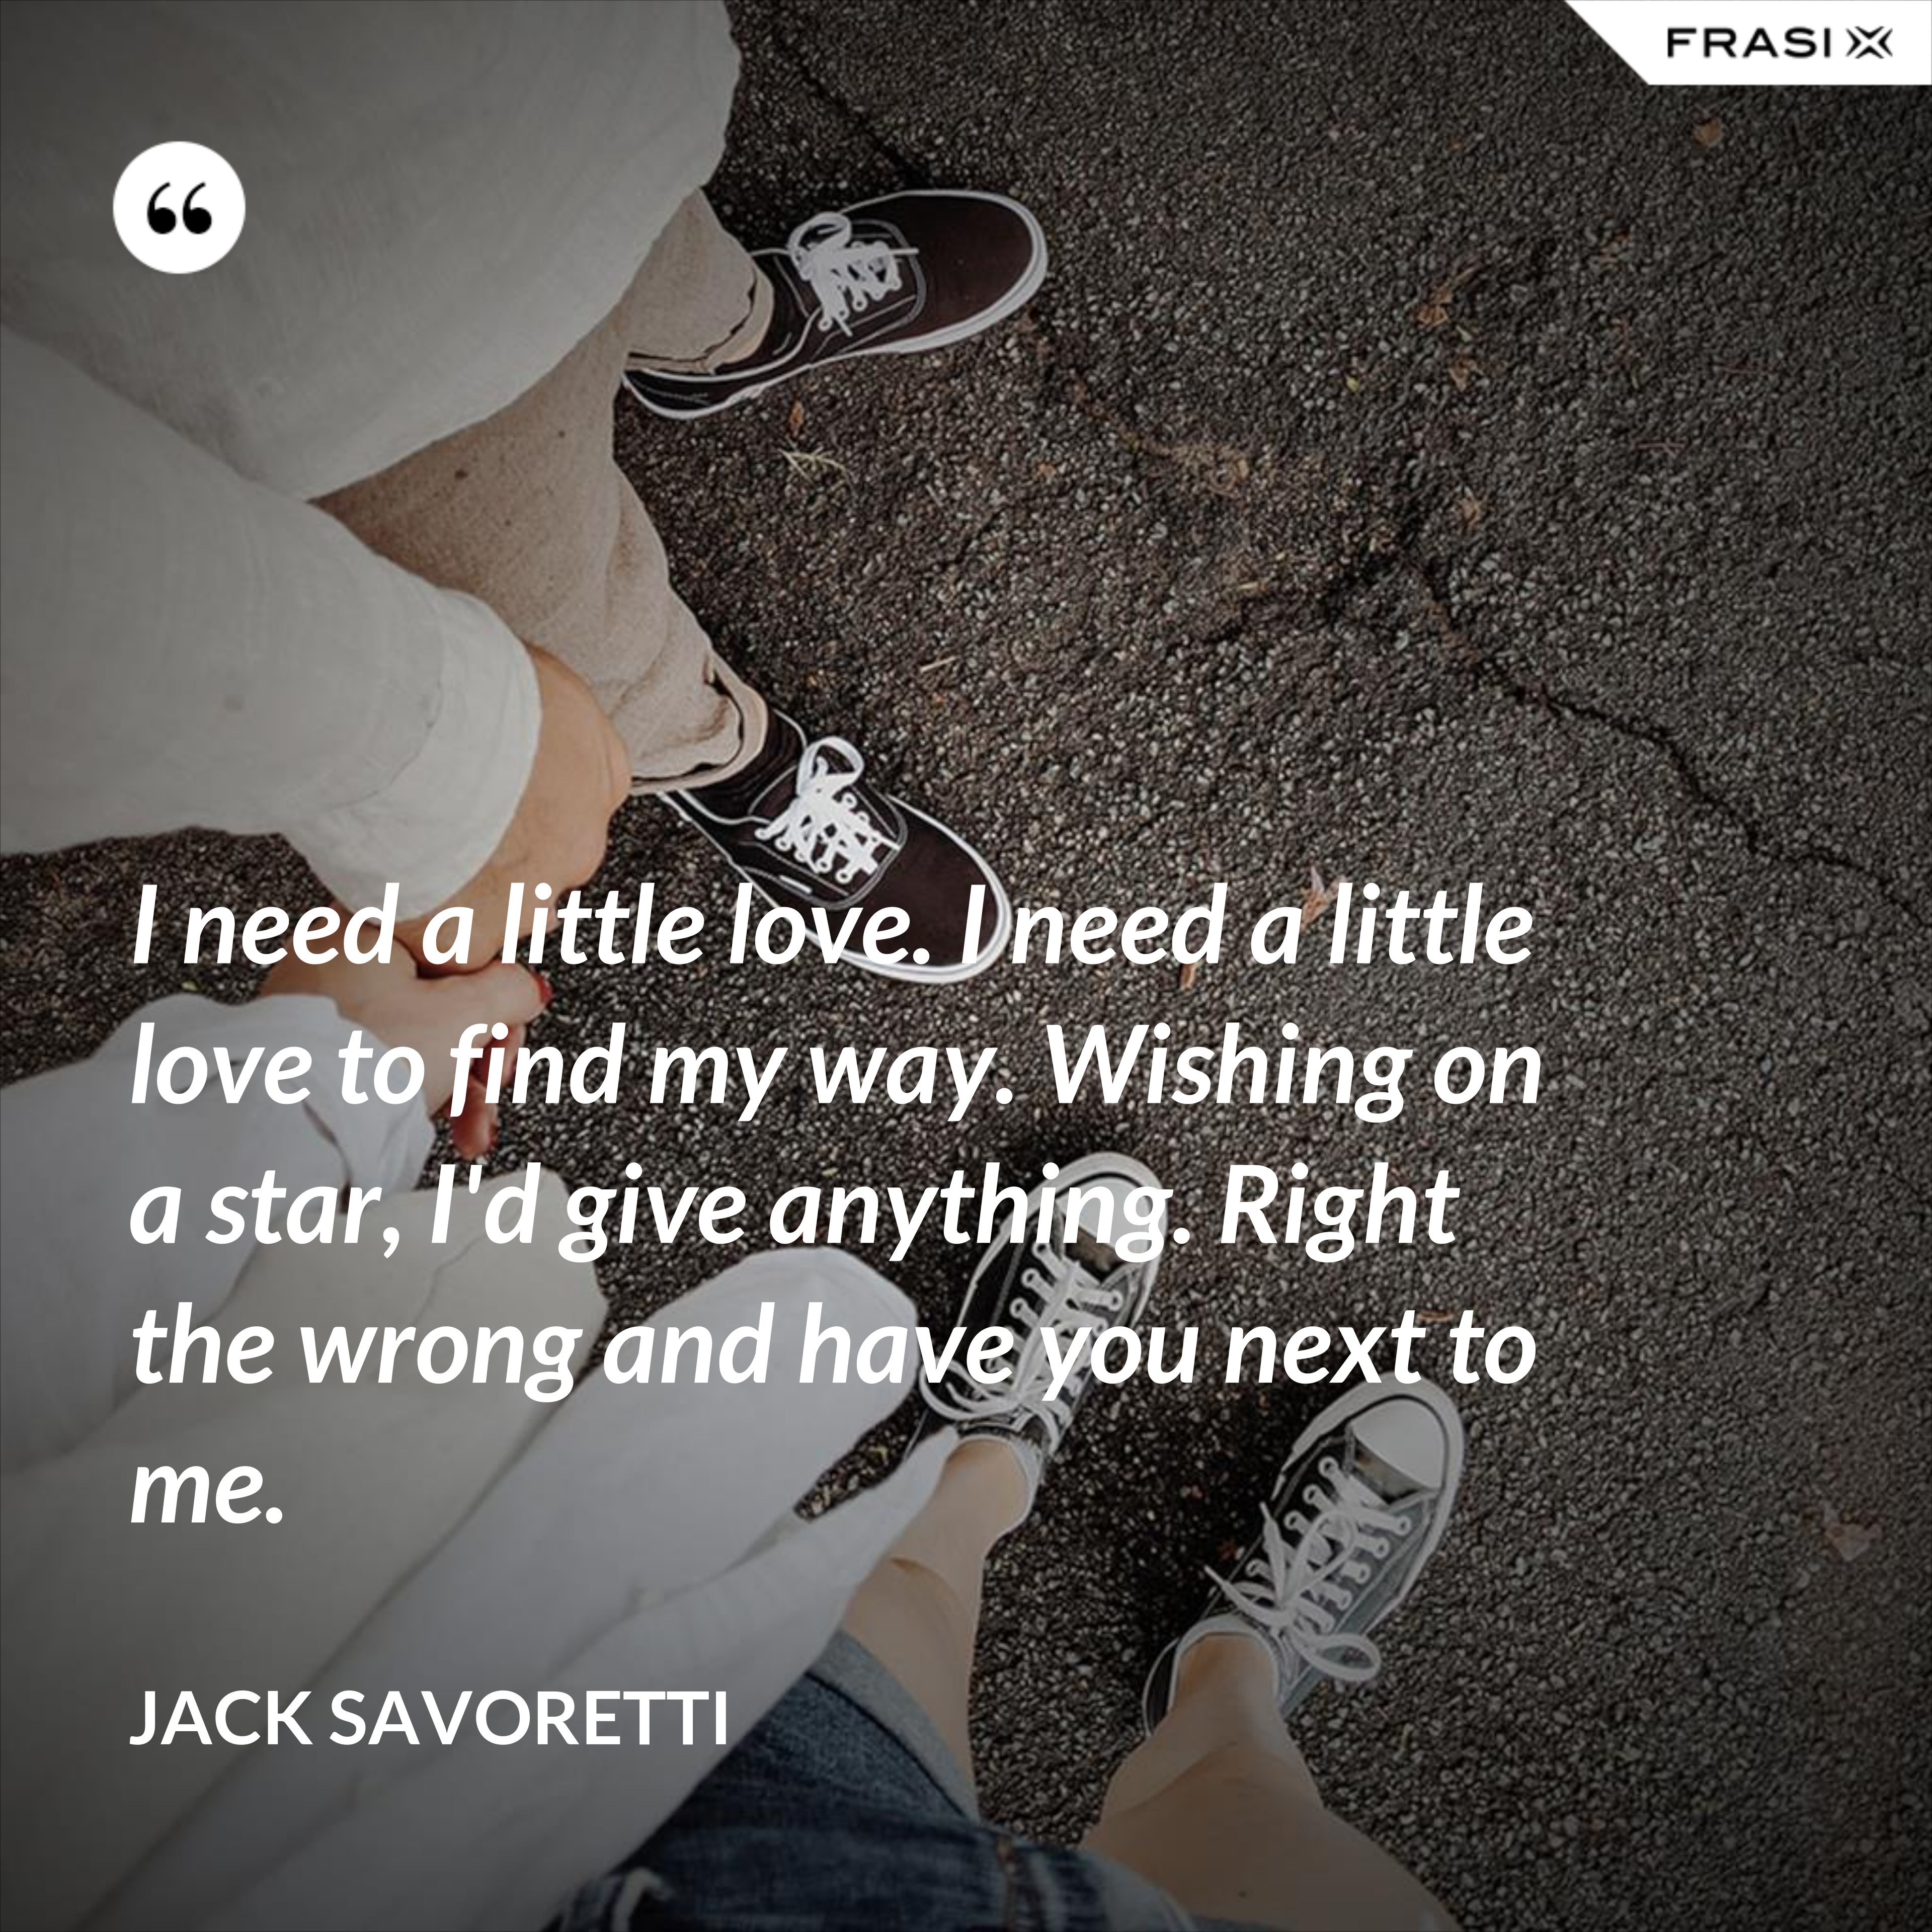 I need a little love. I need a little love to find my way. Wishing on a star, I'd give anything. Right the wrong and have you next to me. - Jack Savoretti